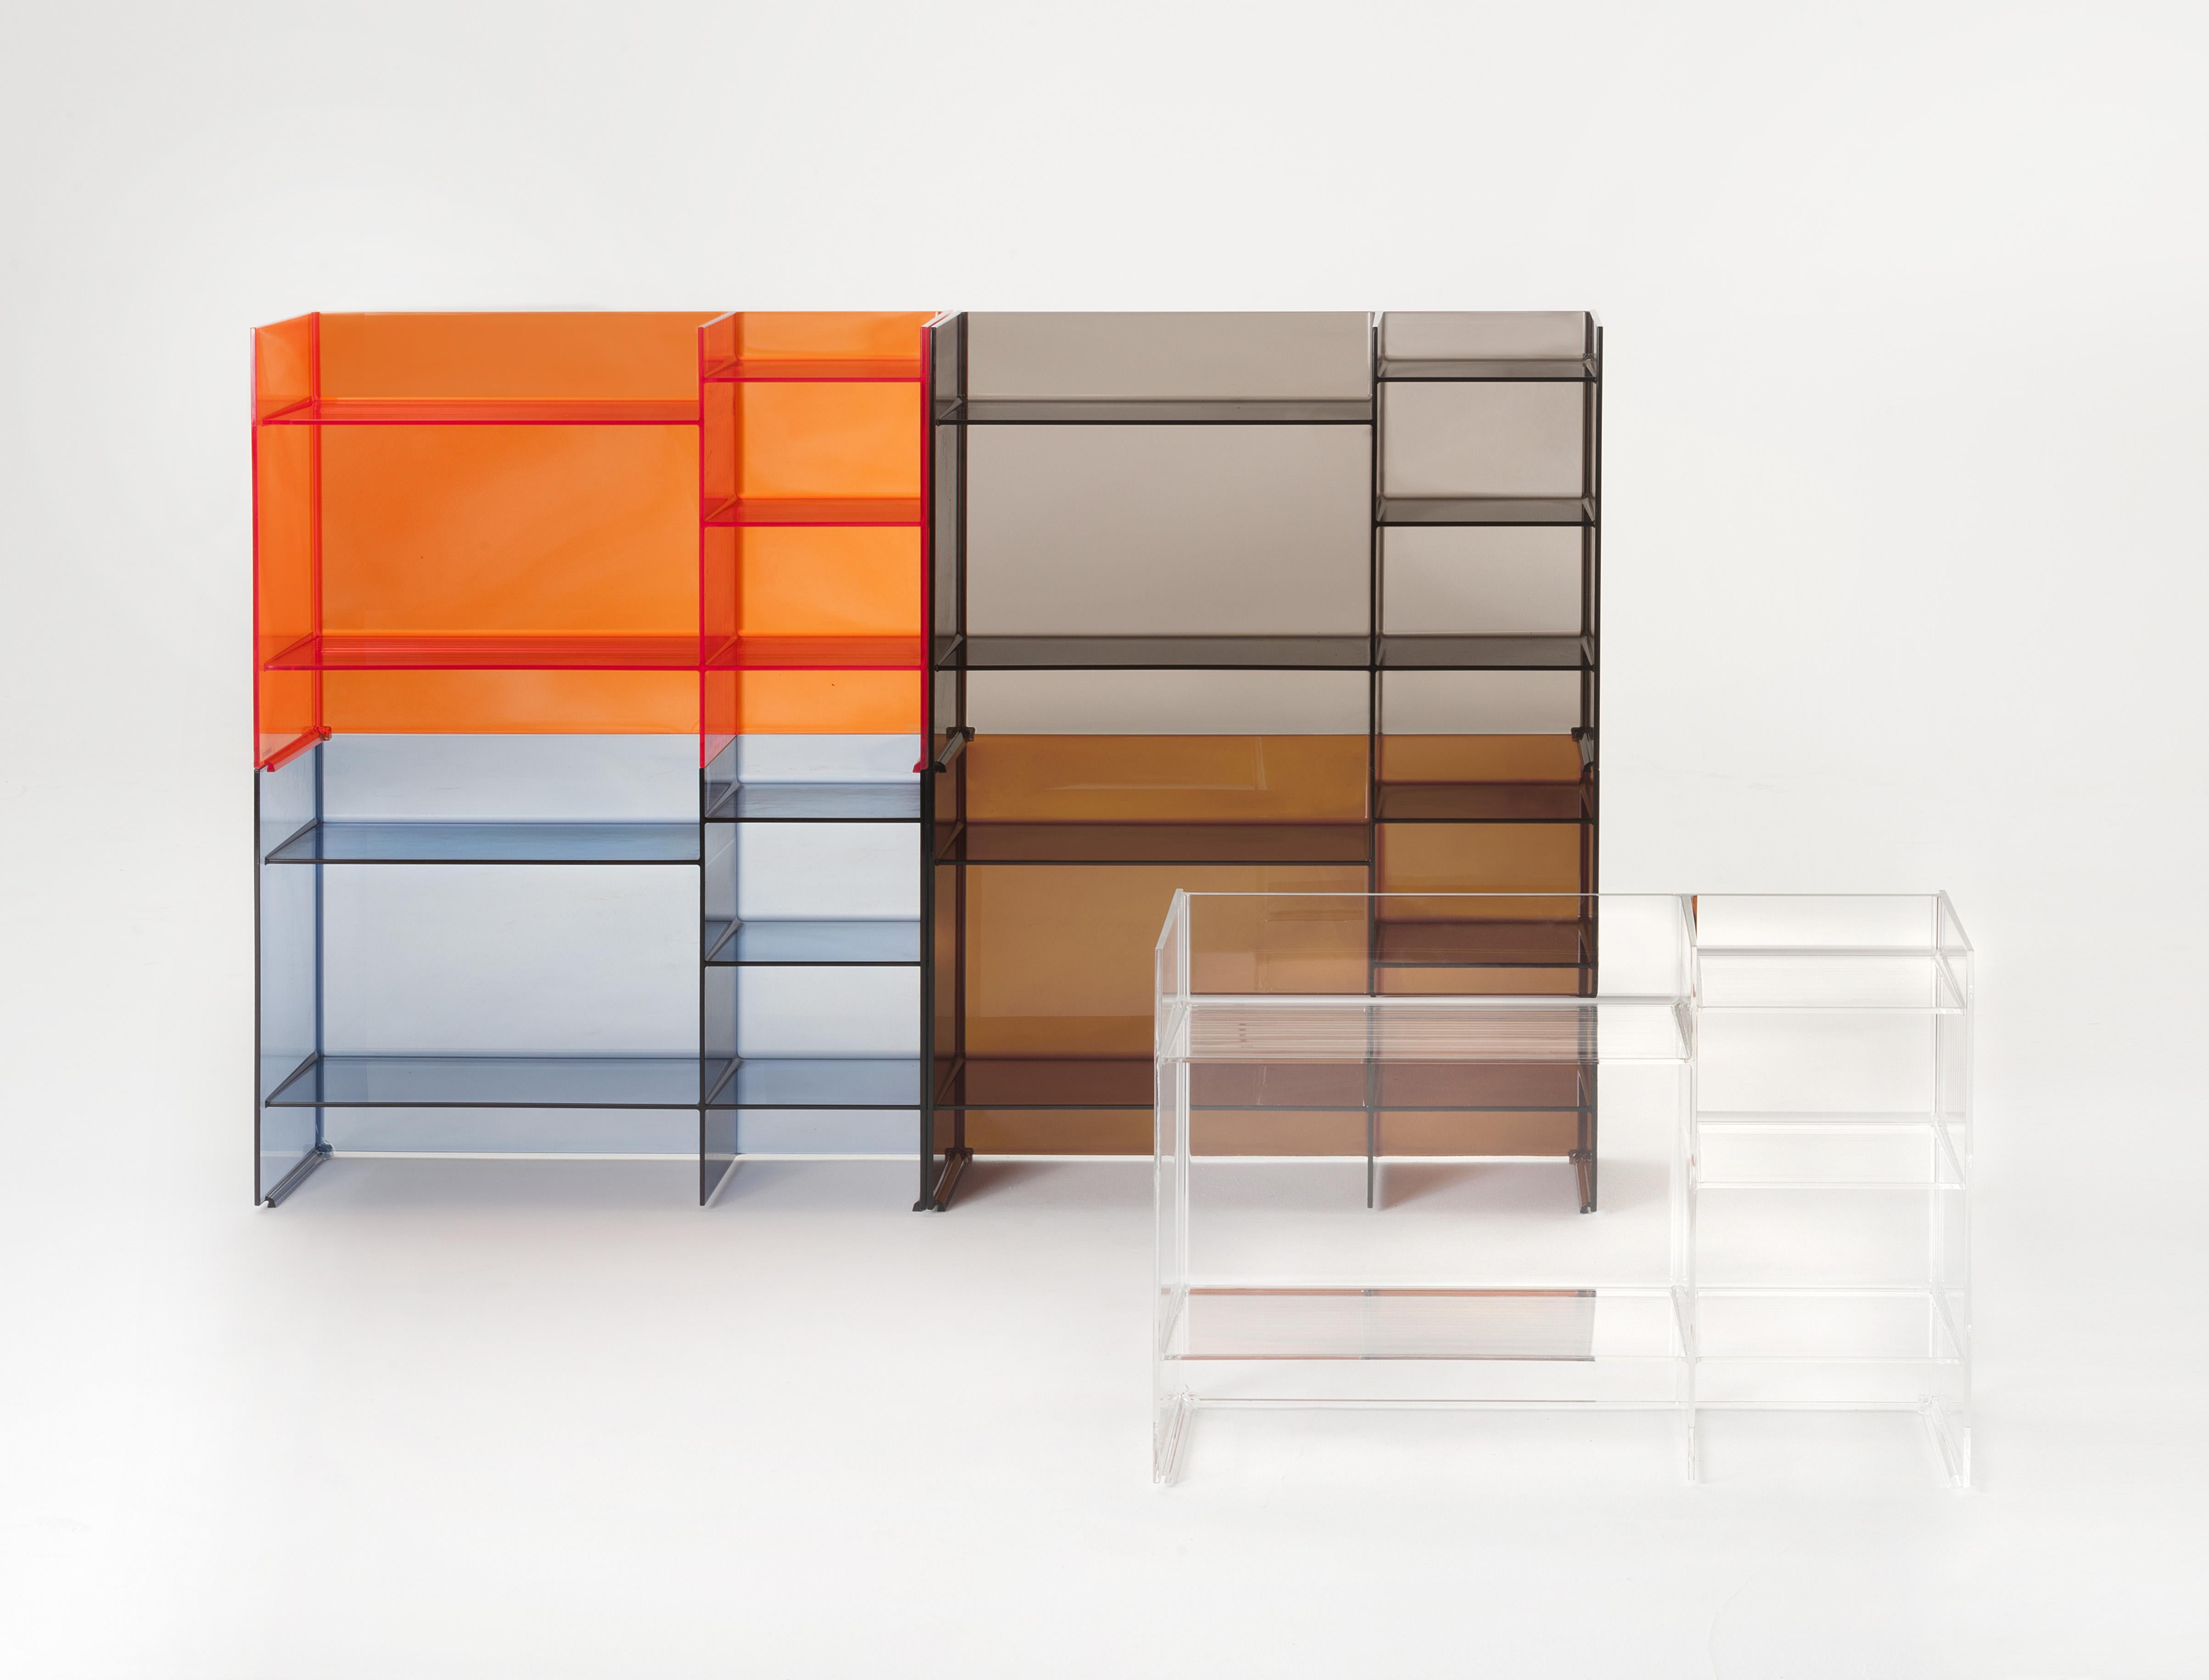 Multi-shaped and multi-purpose shelving system, stackable and modular, offering the possibility of creating a variety of geometric and chromatic compositions. This accessory can play the dual role as both container and room divider. It is a